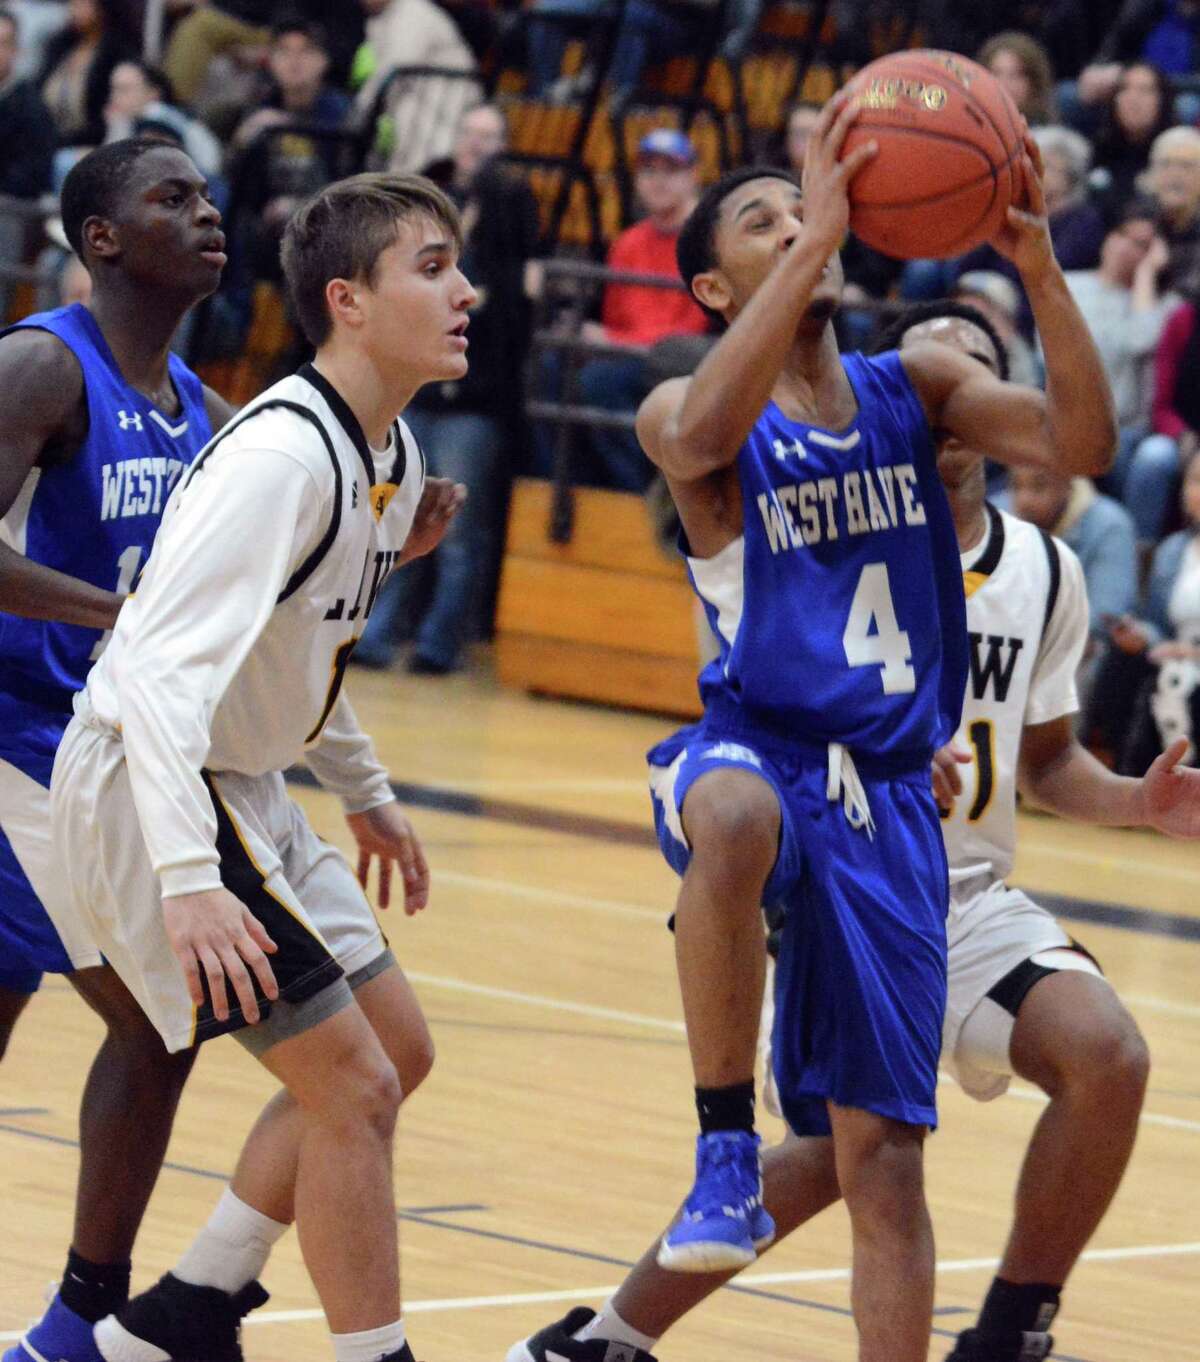 West Haven’s Tyrese Hargrove drives to the basket in front of Law’s Jon Vitale on Friday.